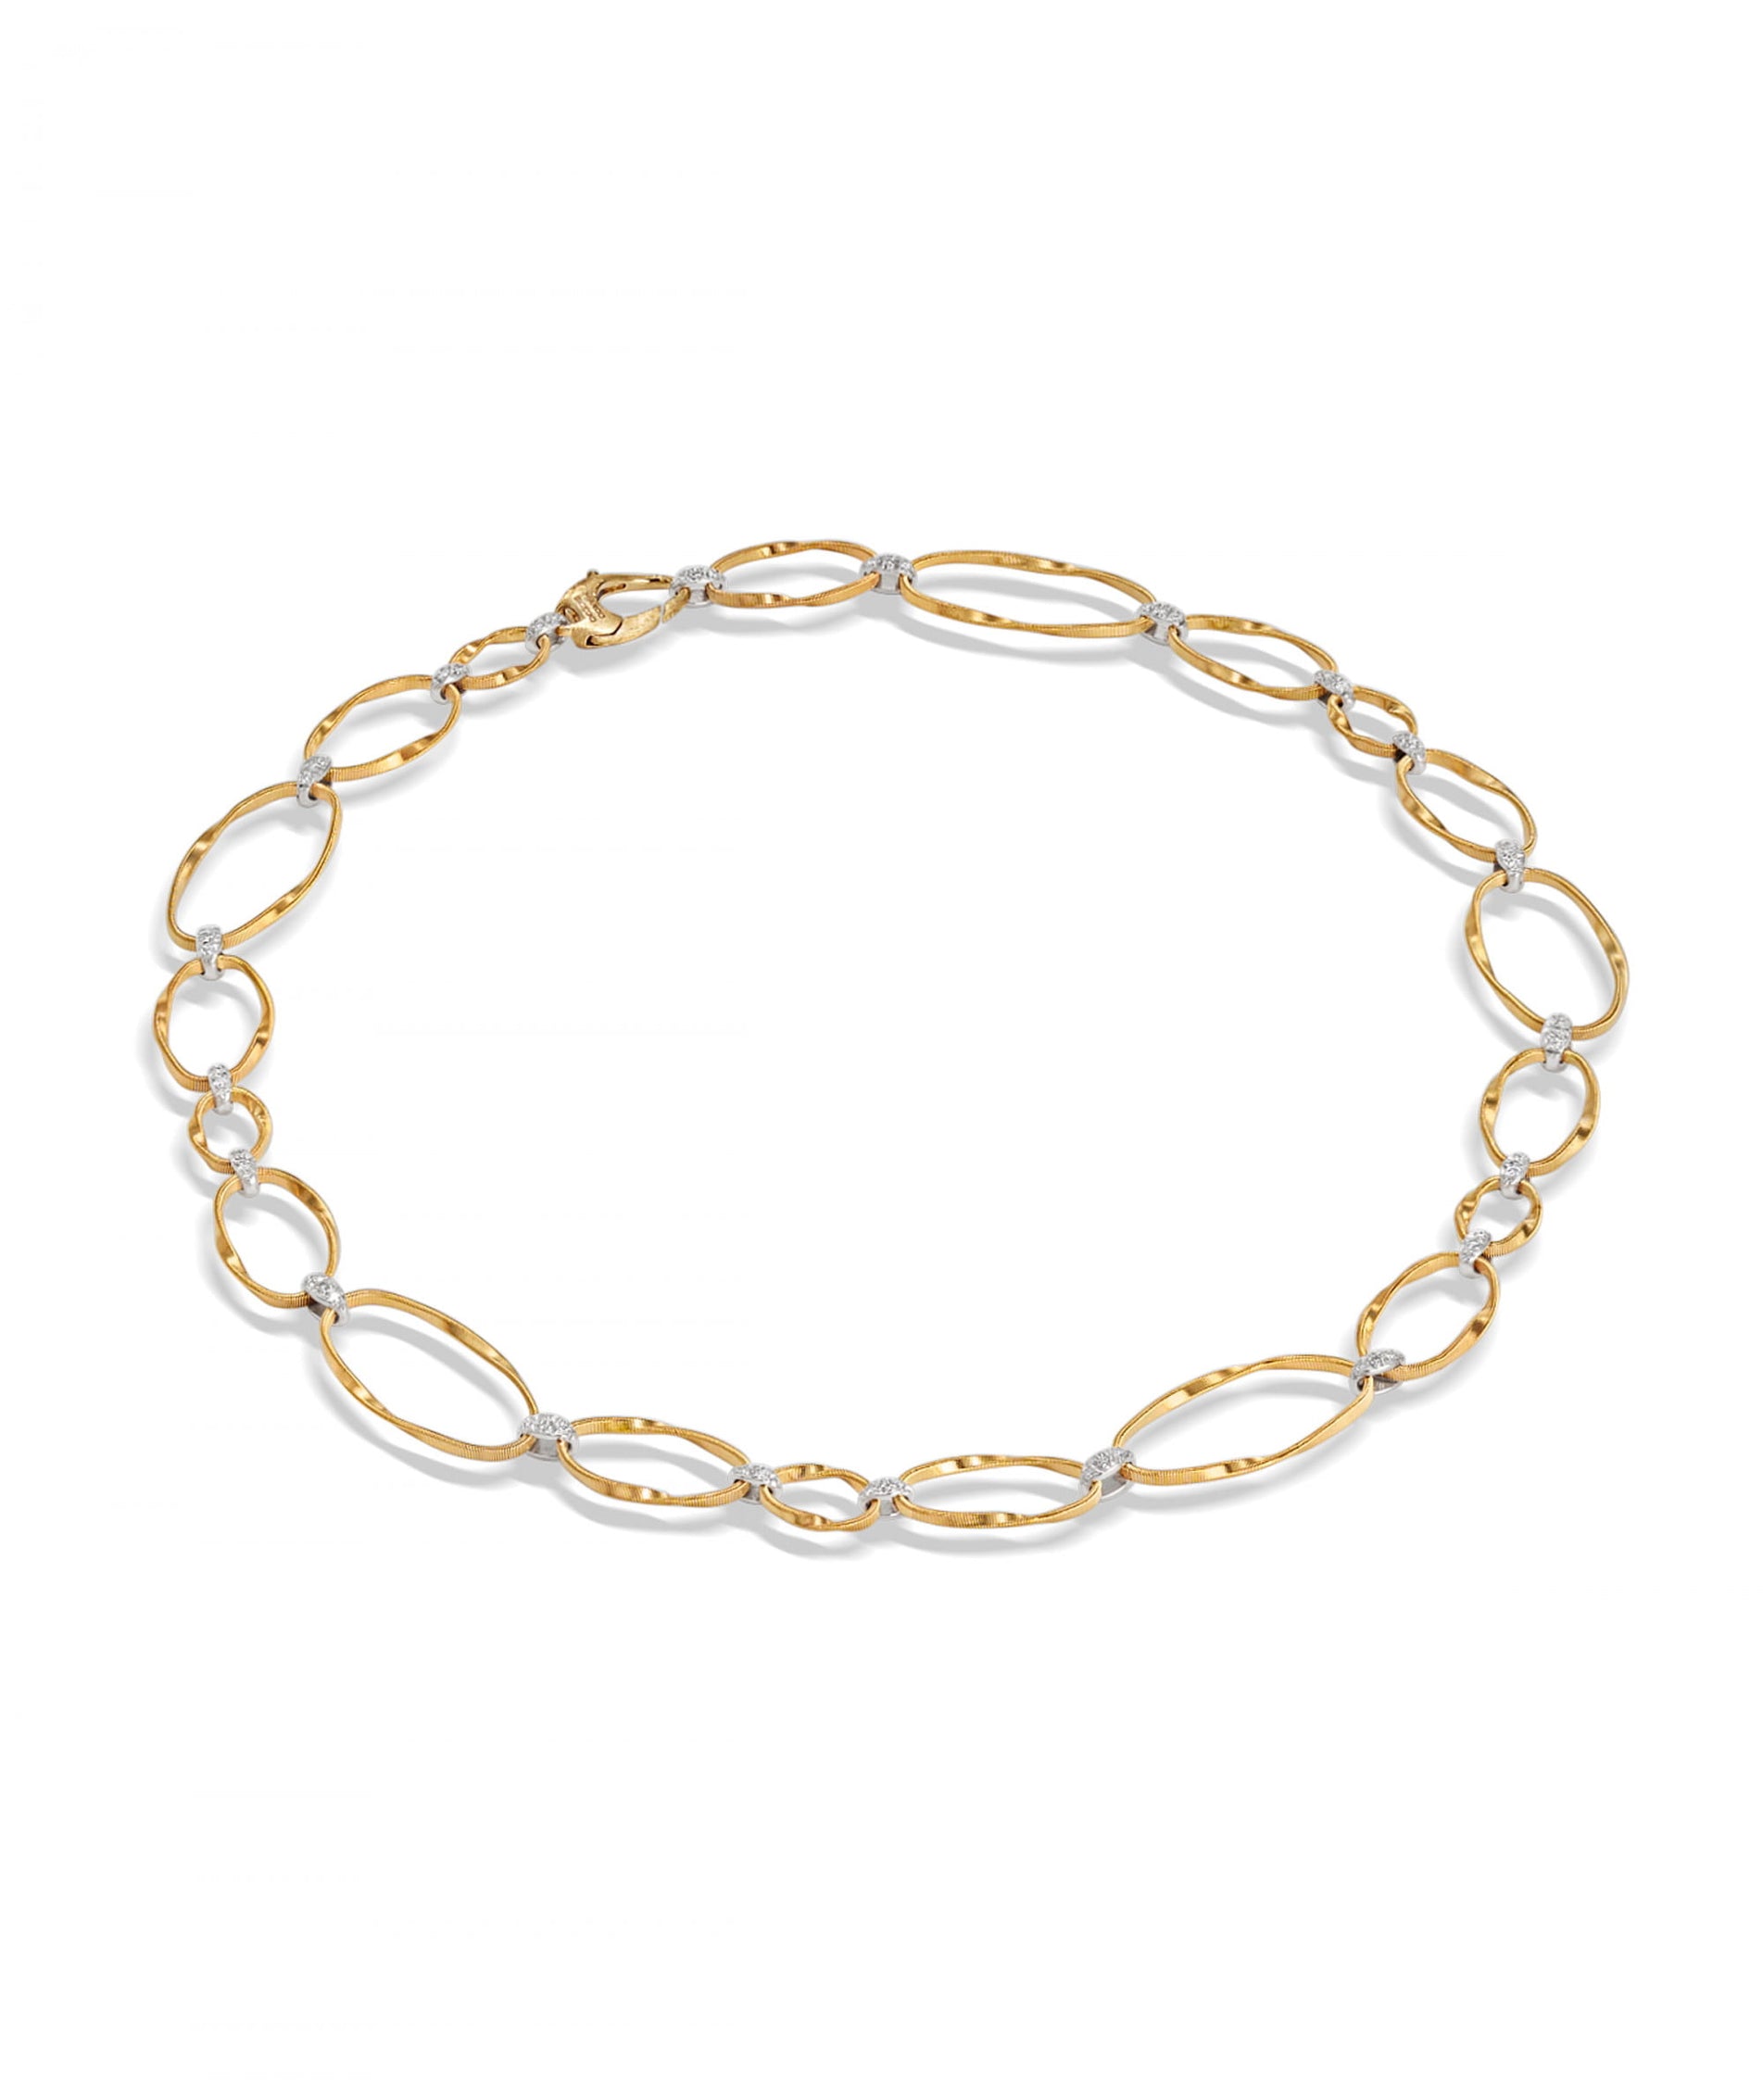 Marco Bicego Marrakech Onde Necklace Diamonds and 18k Gold - Orsini Jewellers